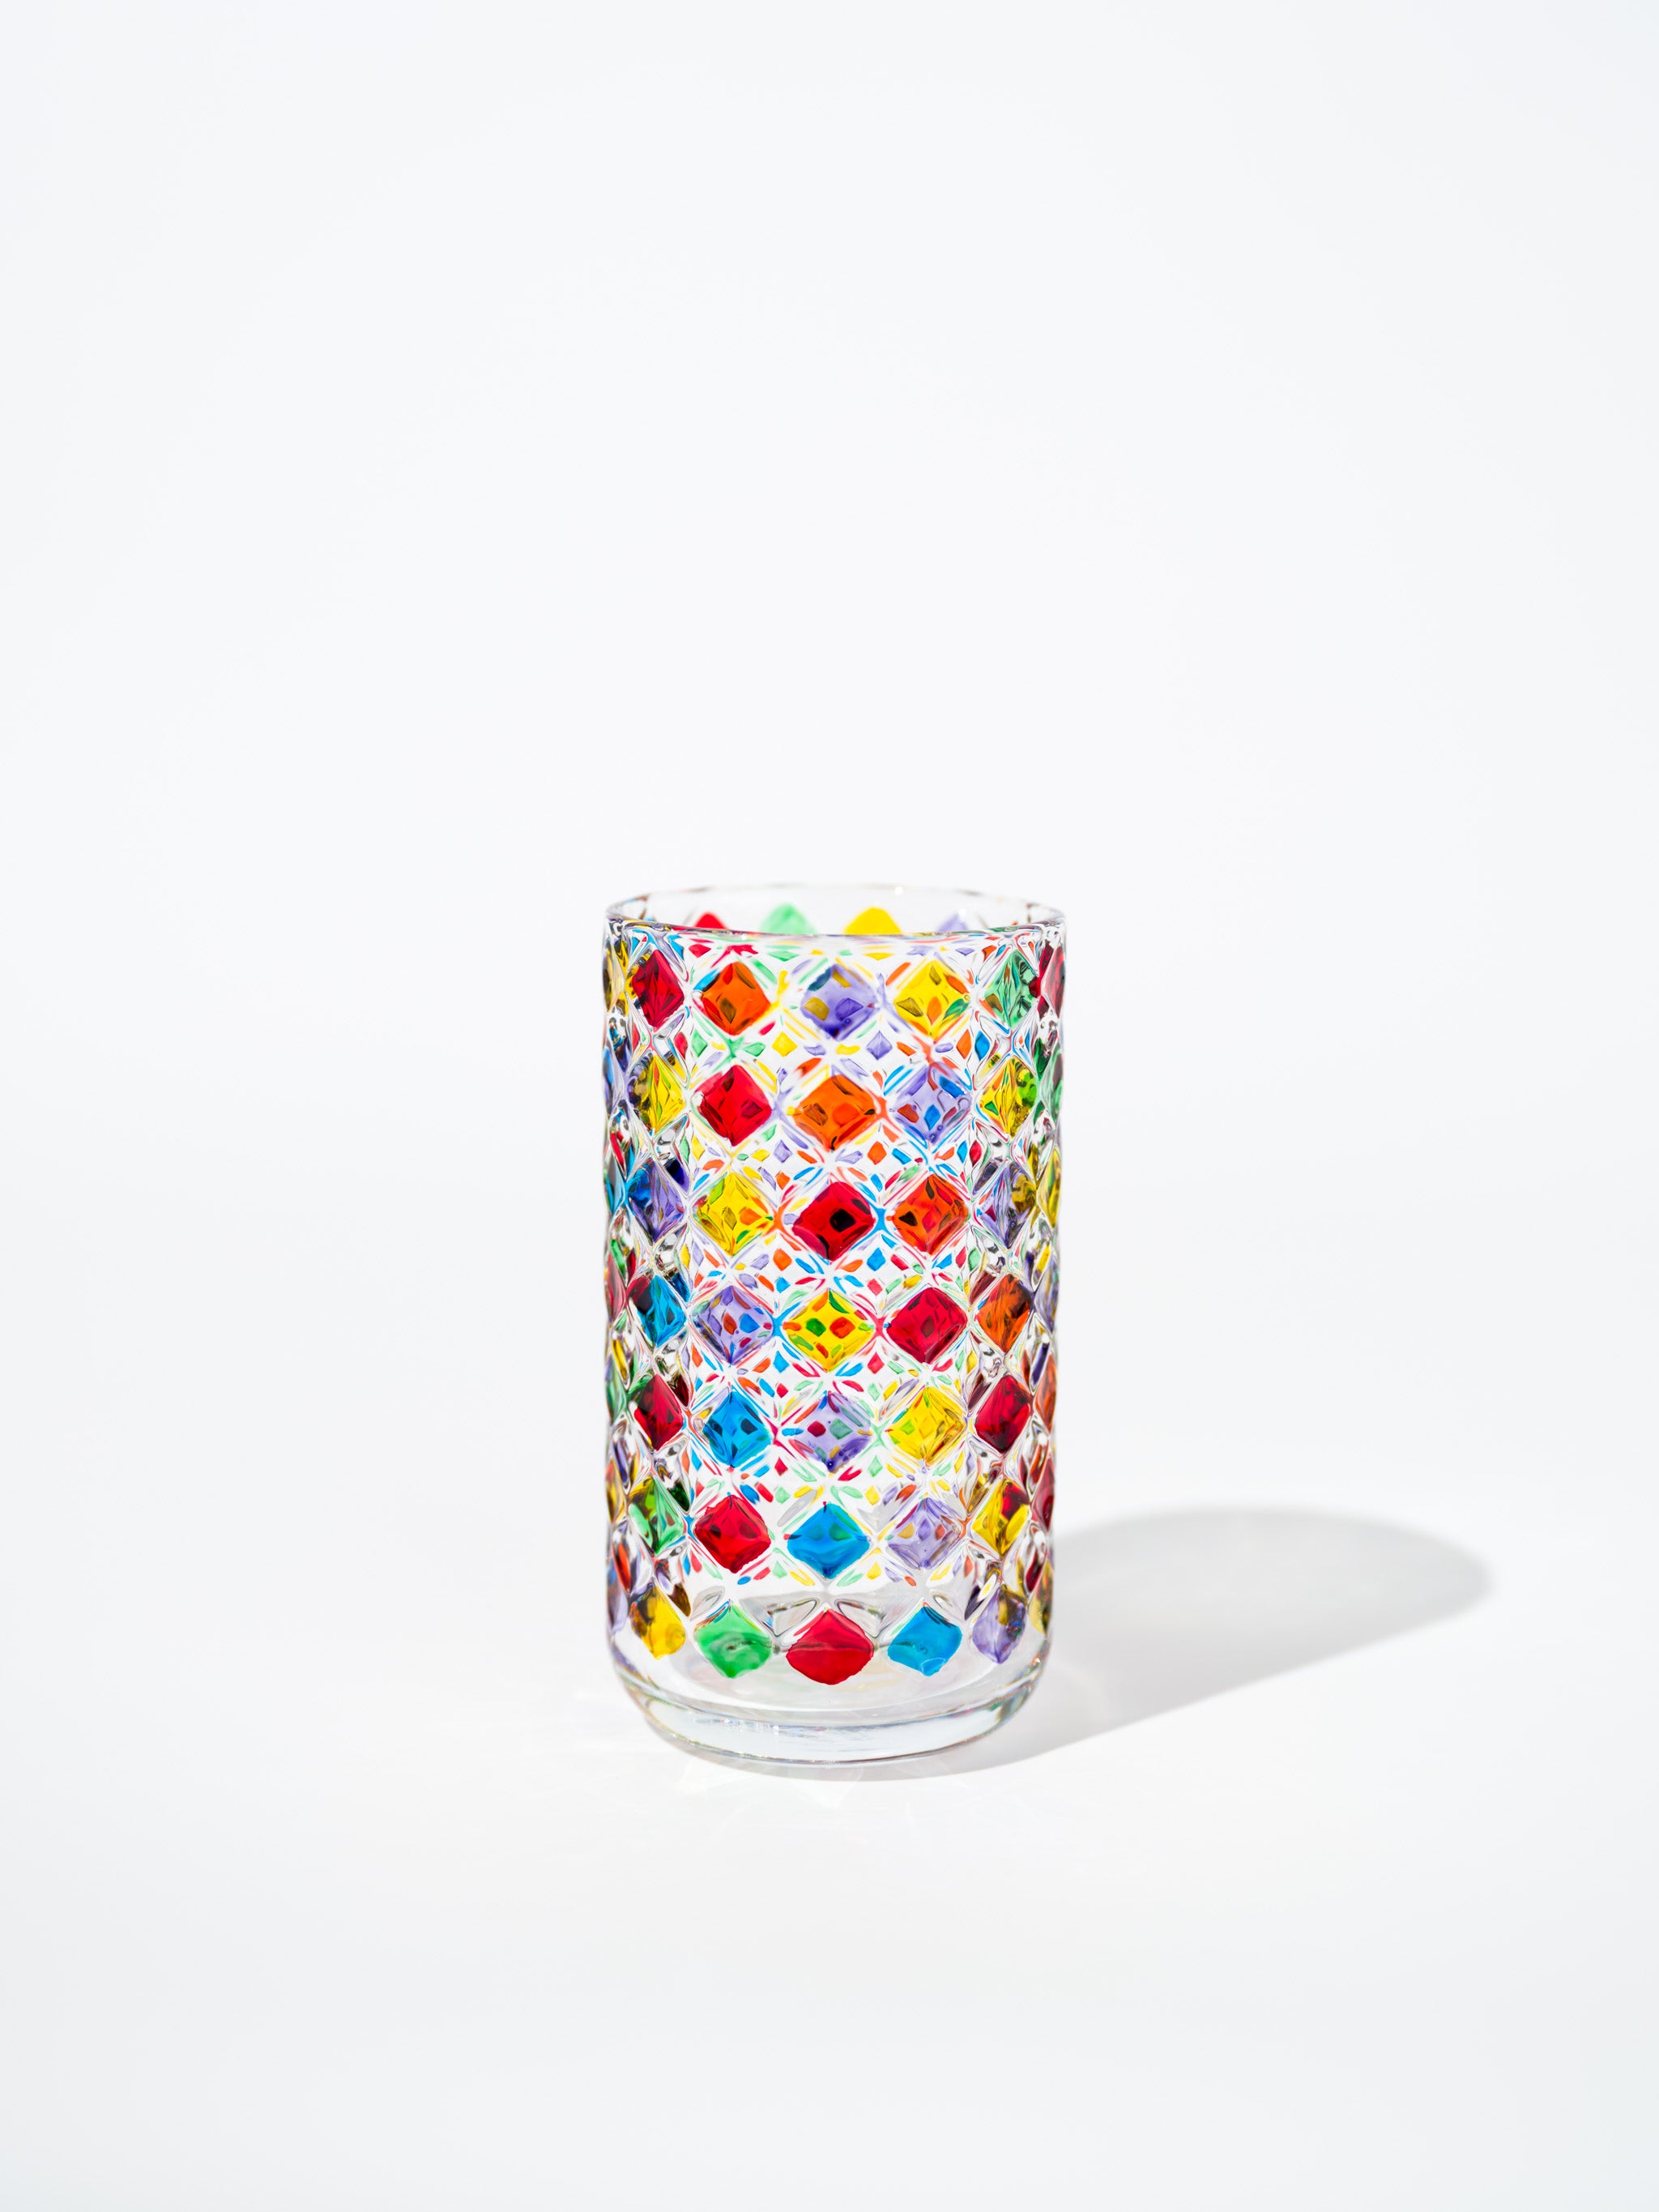 Prismatic Colored Drinking Glass, Gem